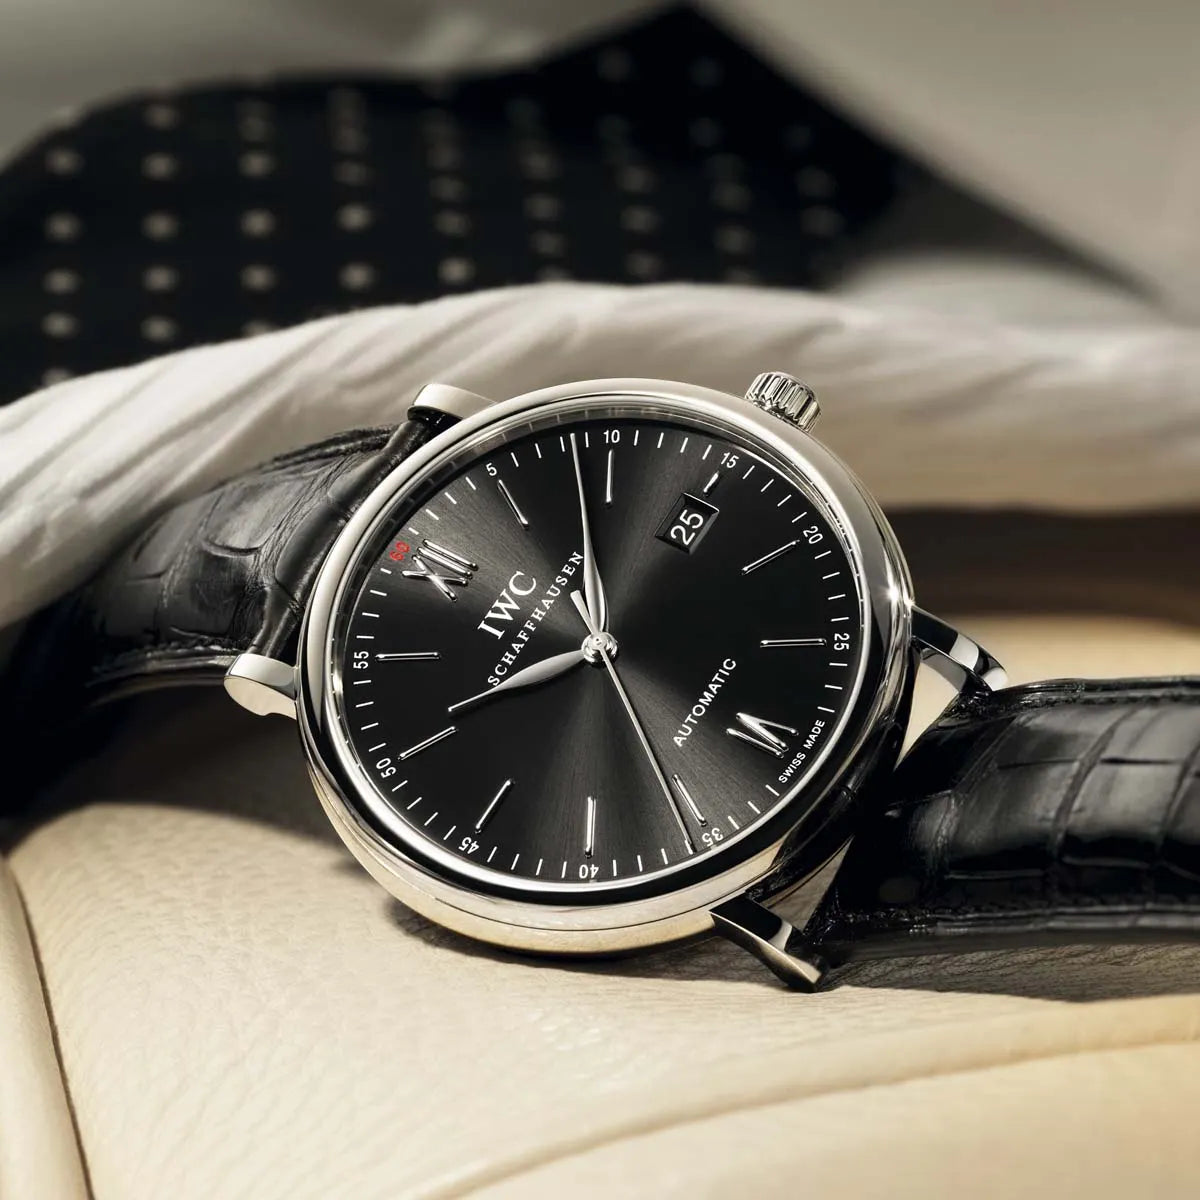 Why the IWC Portofino Should Be the First Watch In Your Luxury Collection